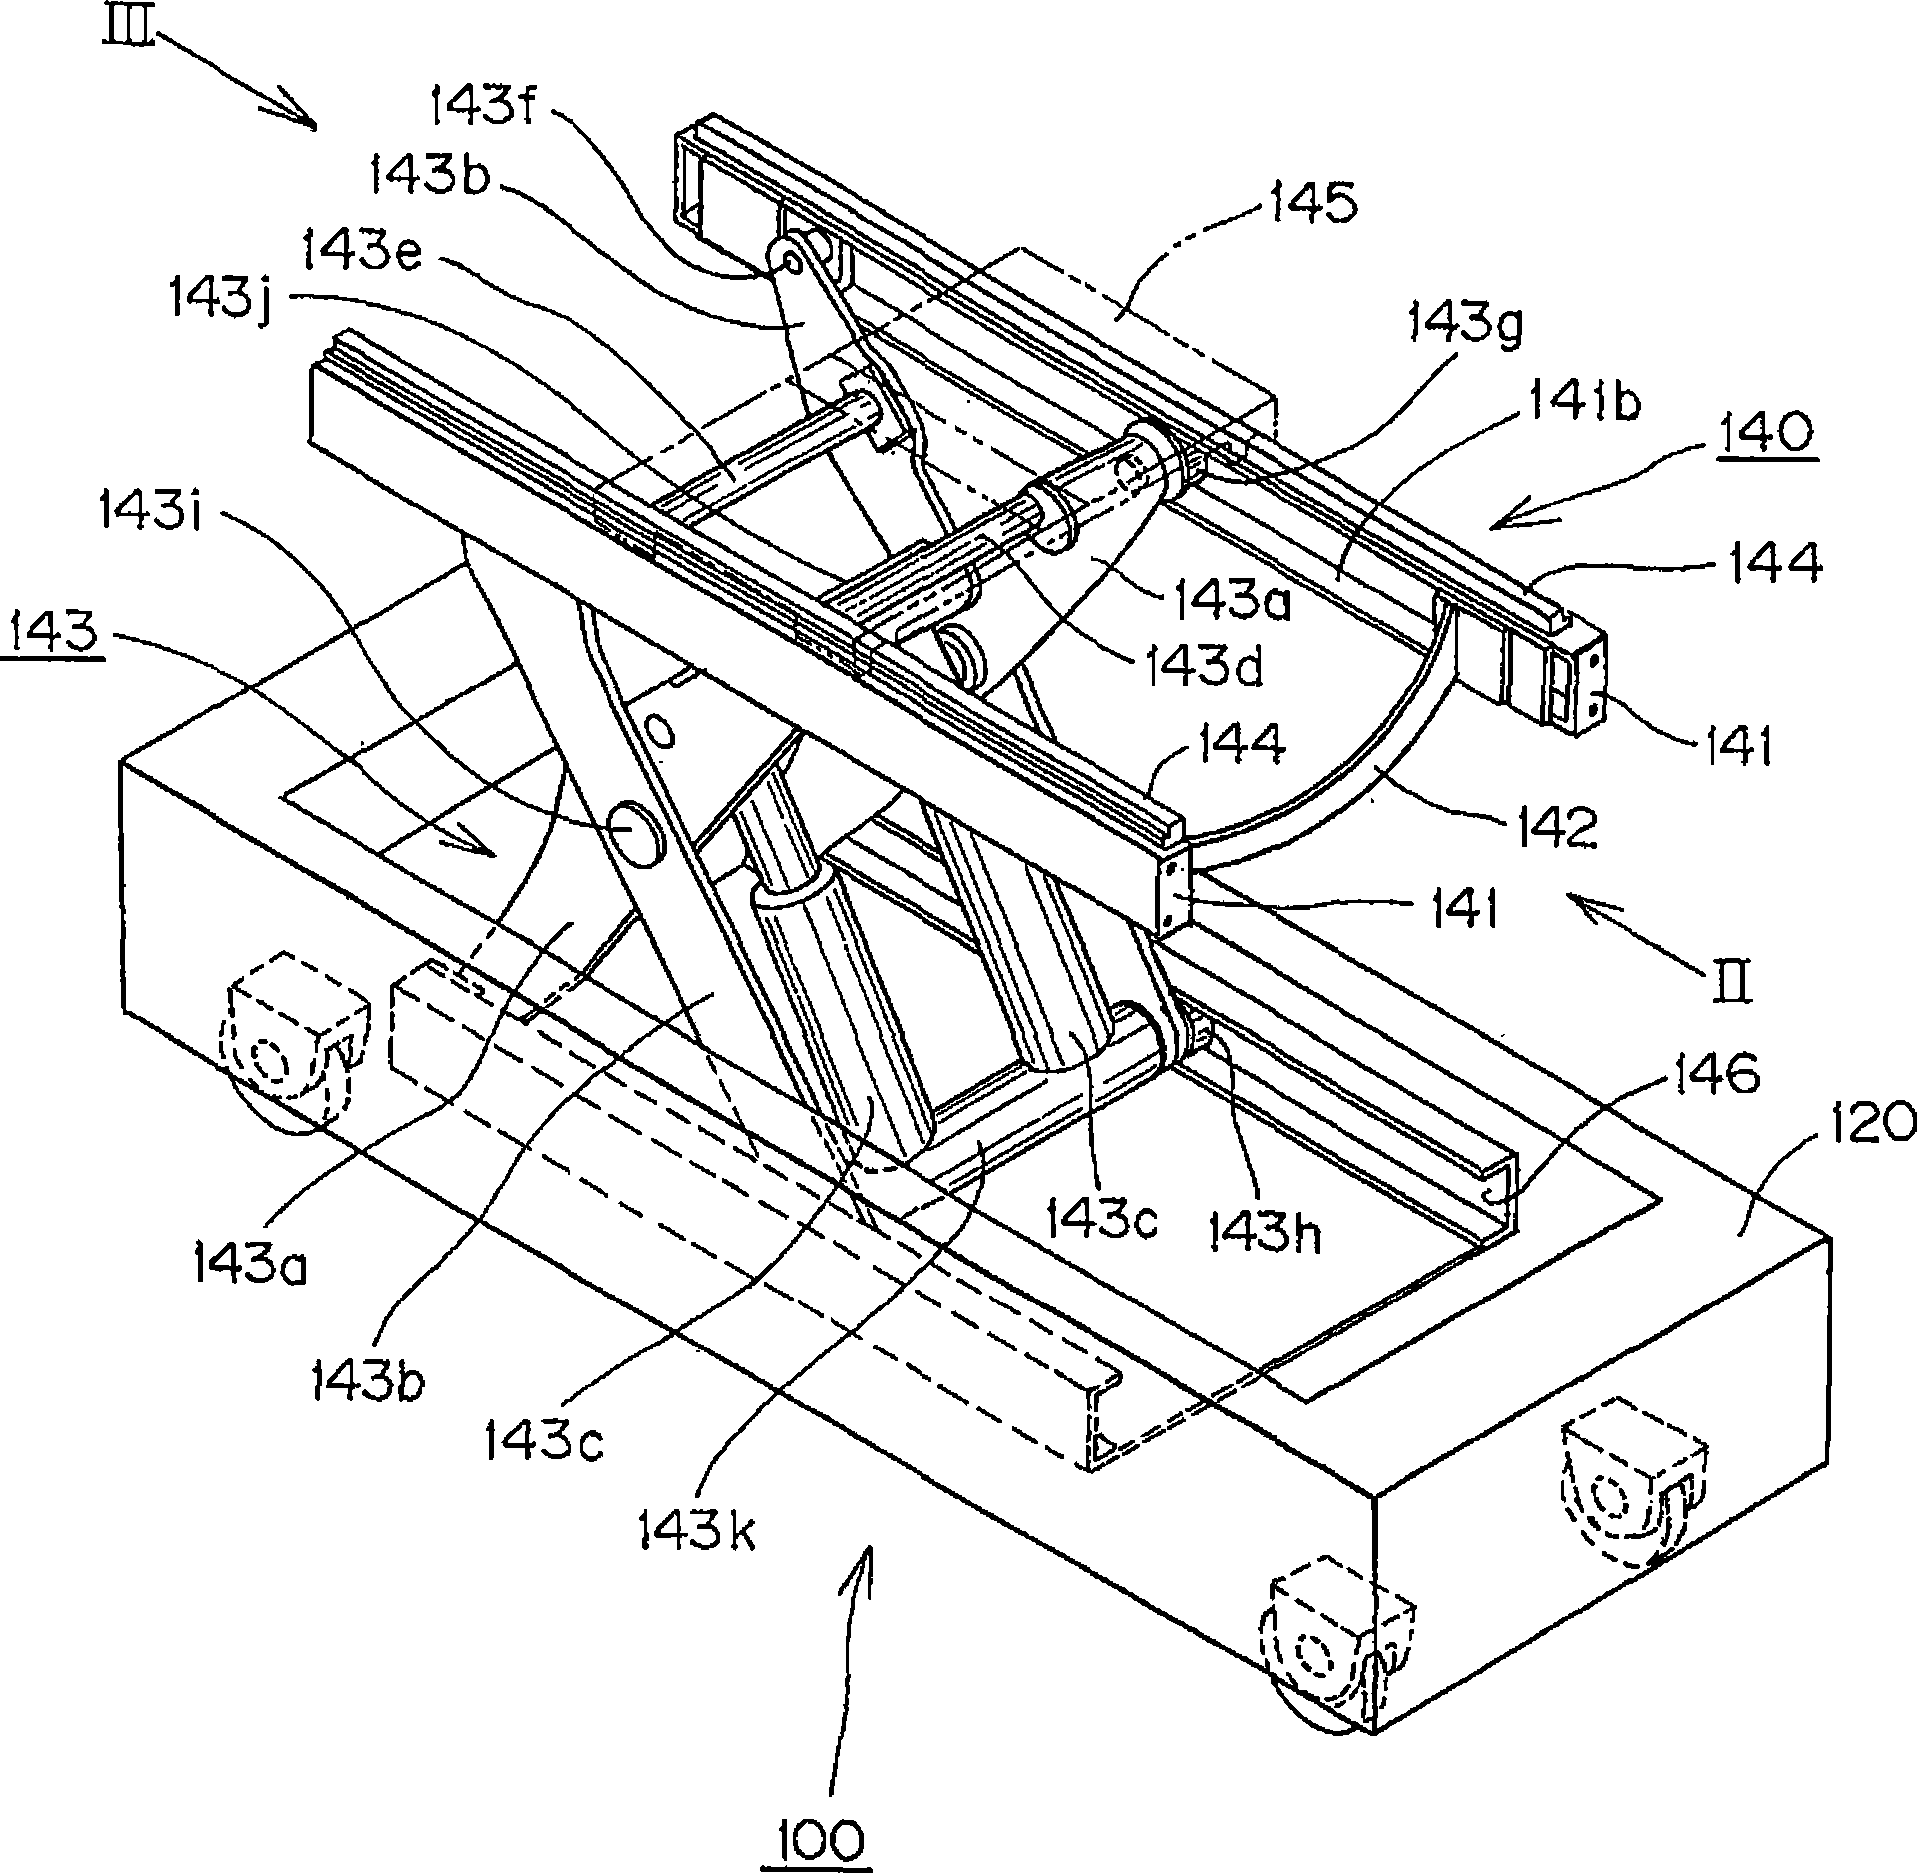 Automated guided vehicle for rolls of newsprint